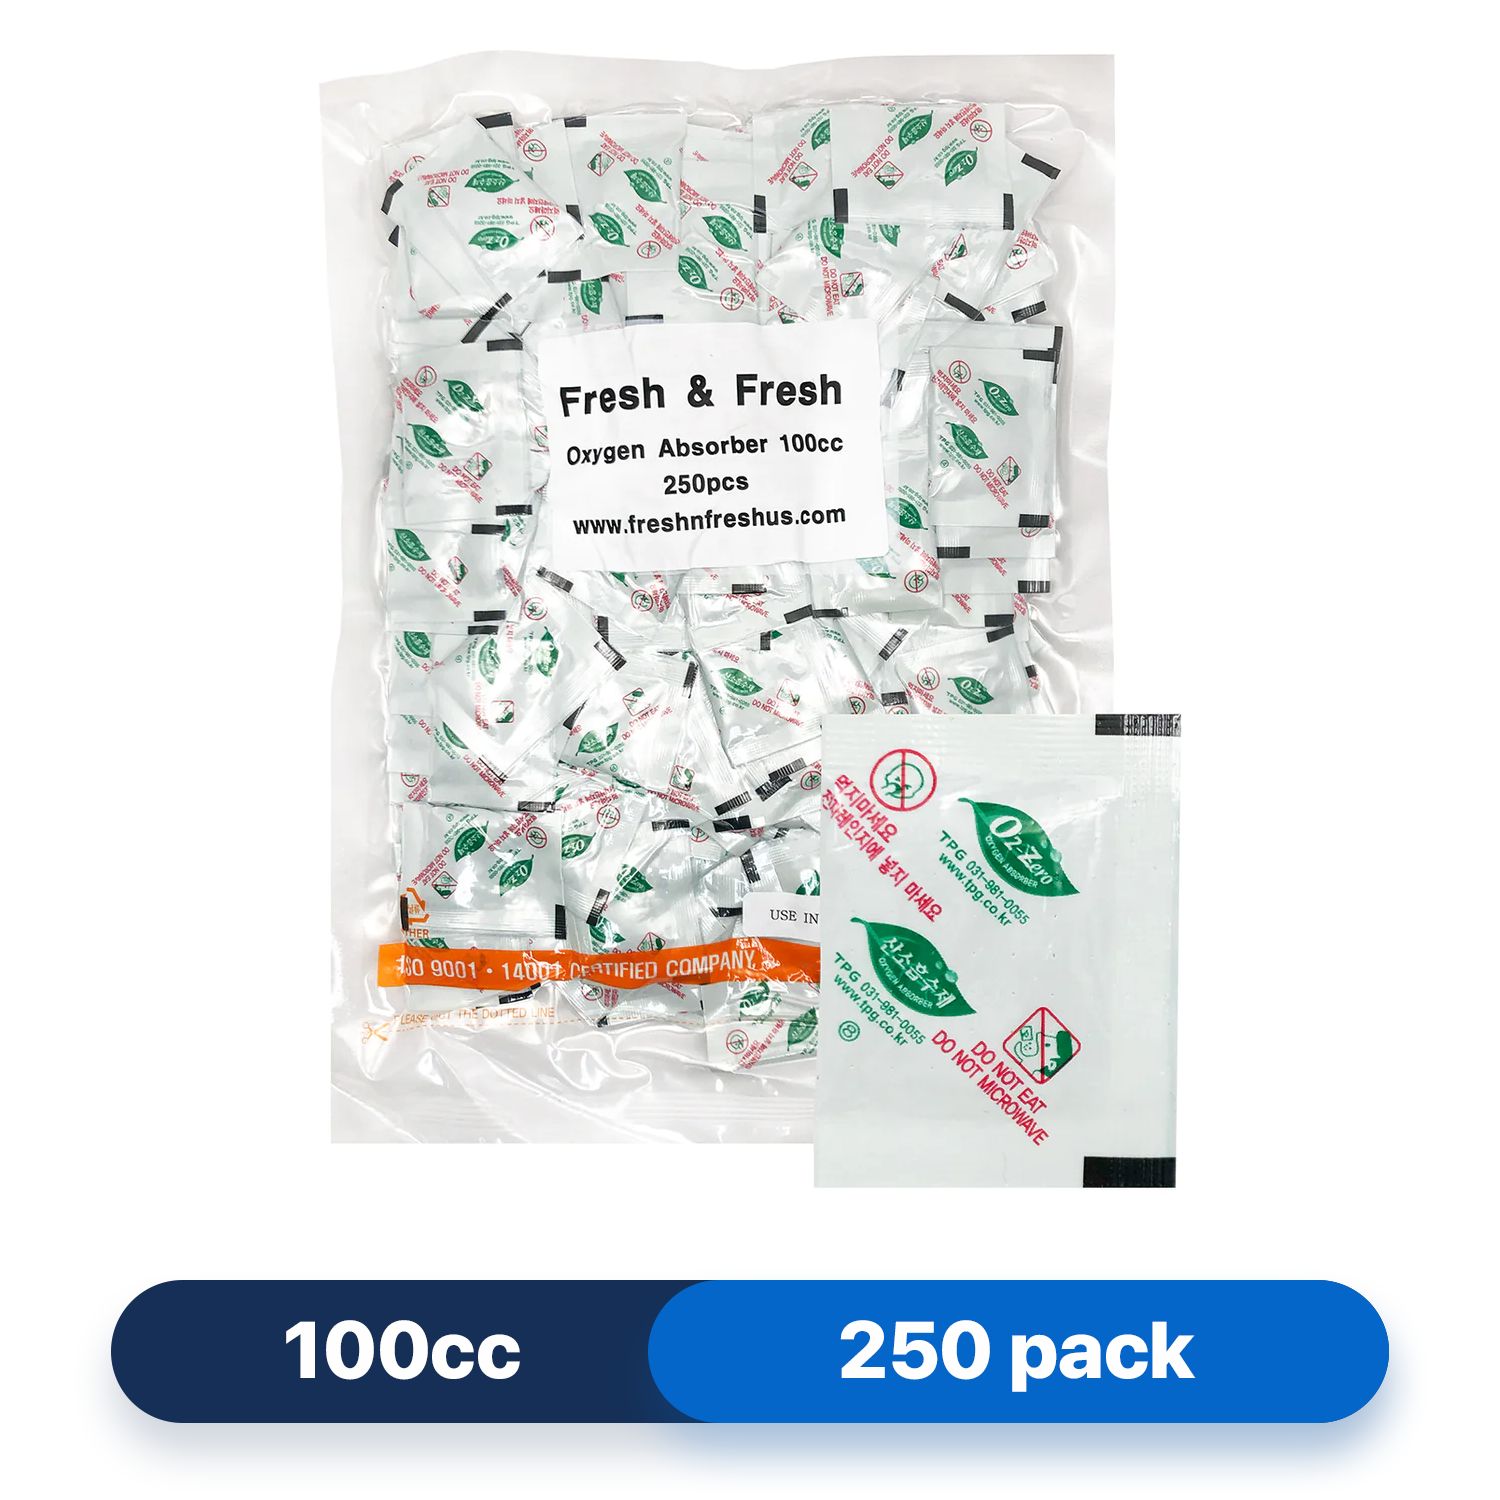 Fresh & Fresh (250 Packs) 100 CC Premium Oxygen Absorbers(1 Bag of 250 Packets) - ISO 9001 & 14001 Certified Facility Manufactured